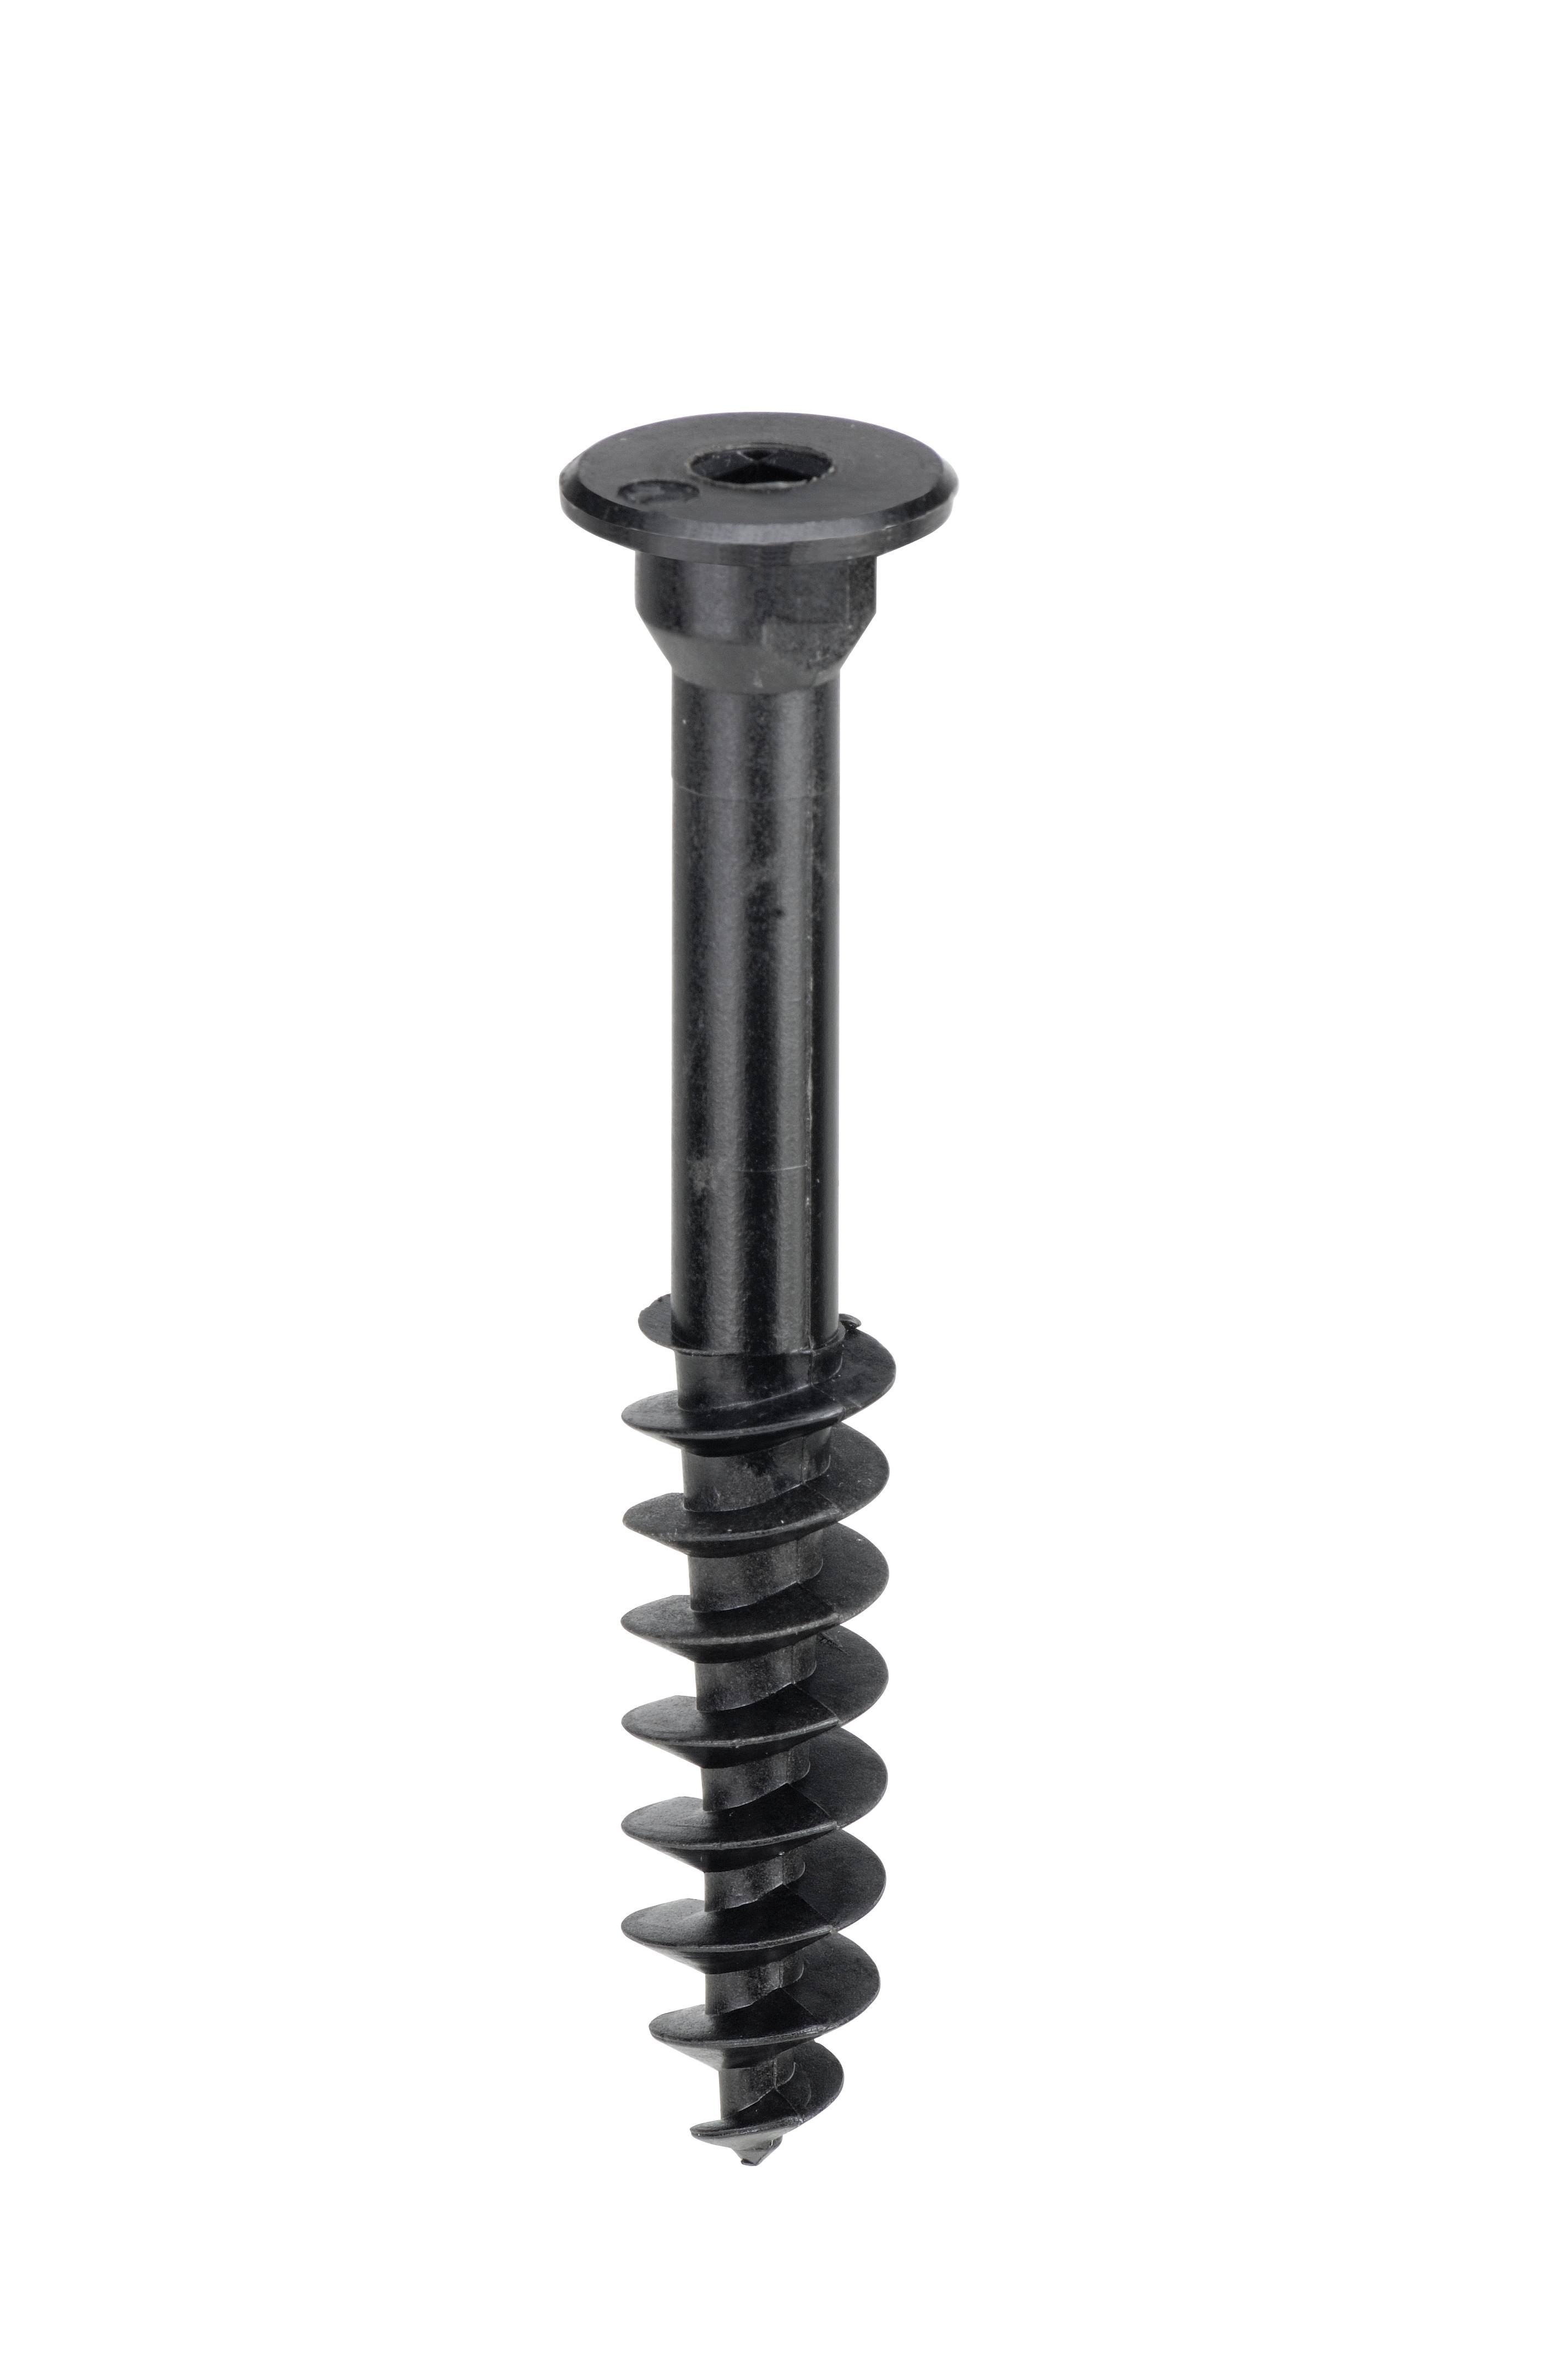 TechFast TFHL5538 Hex Head Roofing Screw Light Section 5.5 x 38mm Pack of 100 